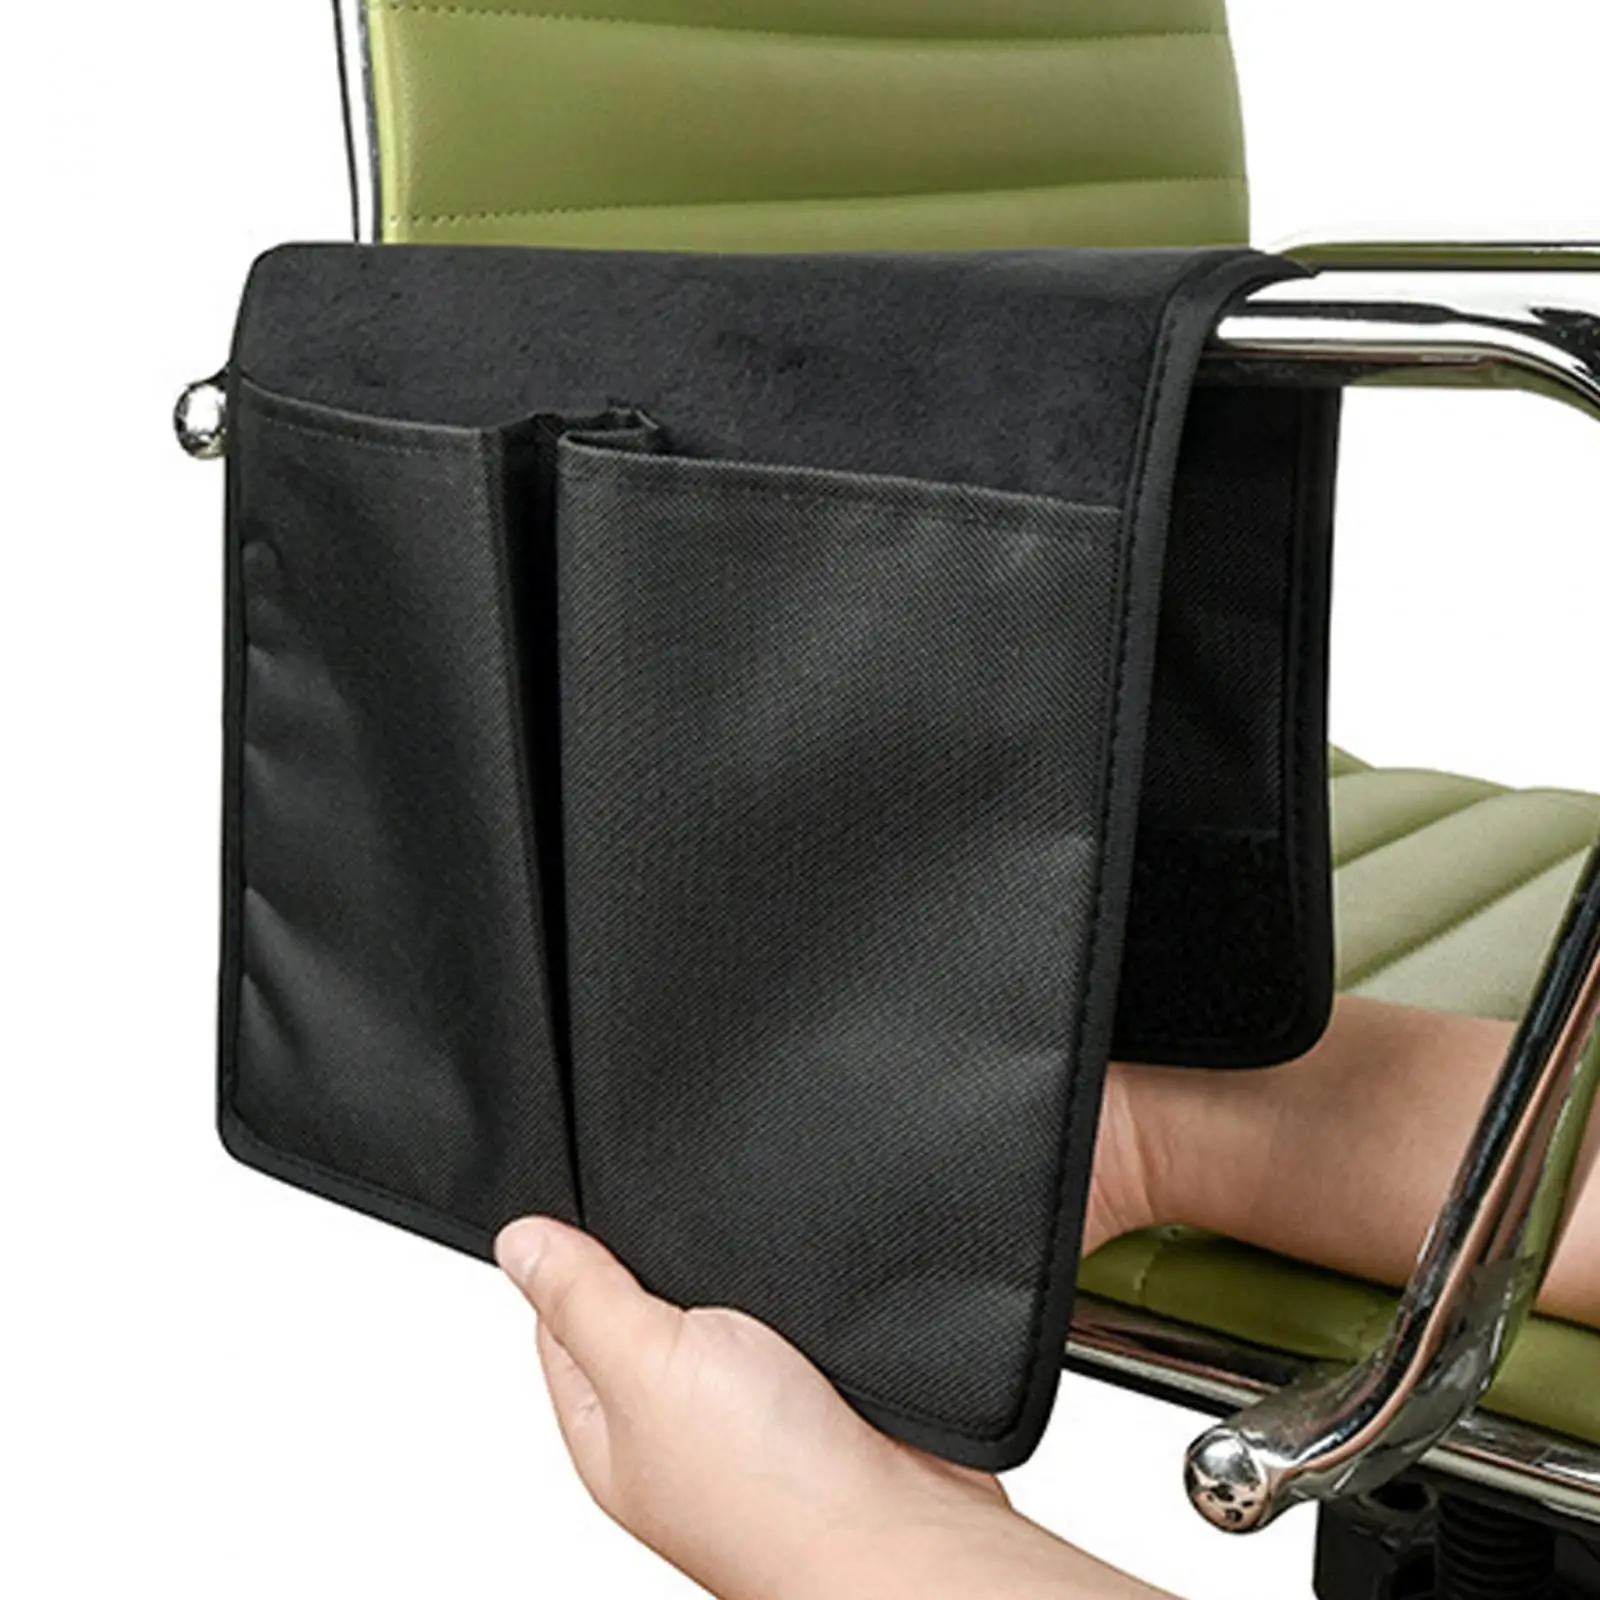 Wheelchair Armrest Pouch Portable Bedside Storage Bag Organizer Cup Holder Chair Side Storage Organizer for Glasses Phone Pen